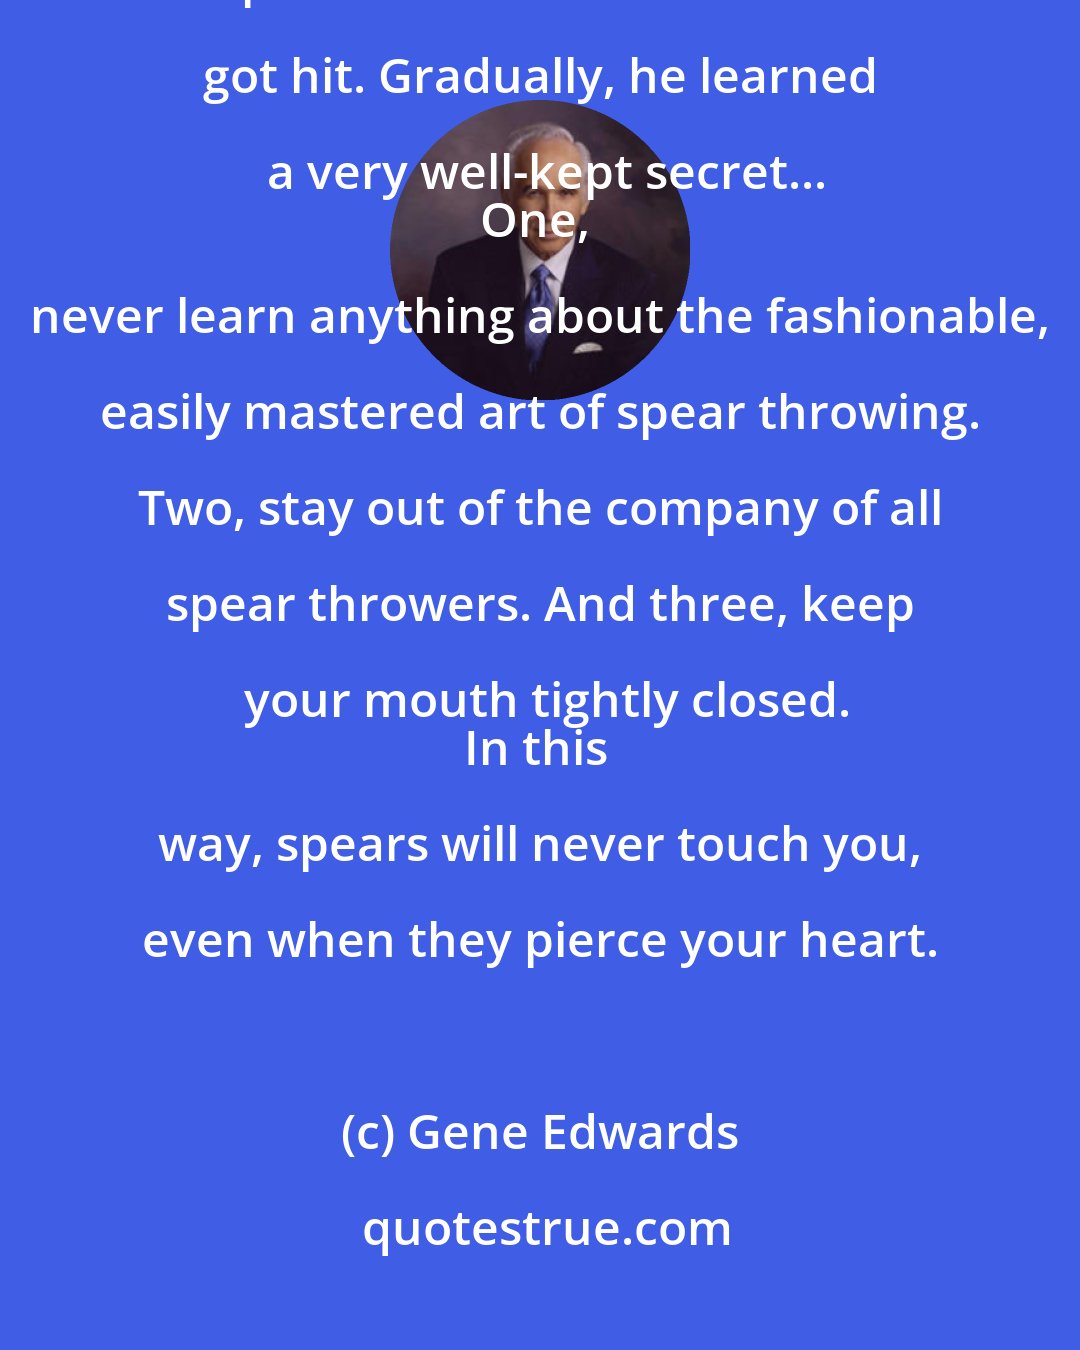 Gene Edwards: You can easily tell when someone has been hit by a spear. he turns a deep shade of bitter. David never got hit. Gradually, he learned a very well-kept secret...
One, never learn anything about the fashionable, easily mastered art of spear throwing. Two, stay out of the company of all spear throwers. And three, keep your mouth tightly closed.
In this way, spears will never touch you, even when they pierce your heart.